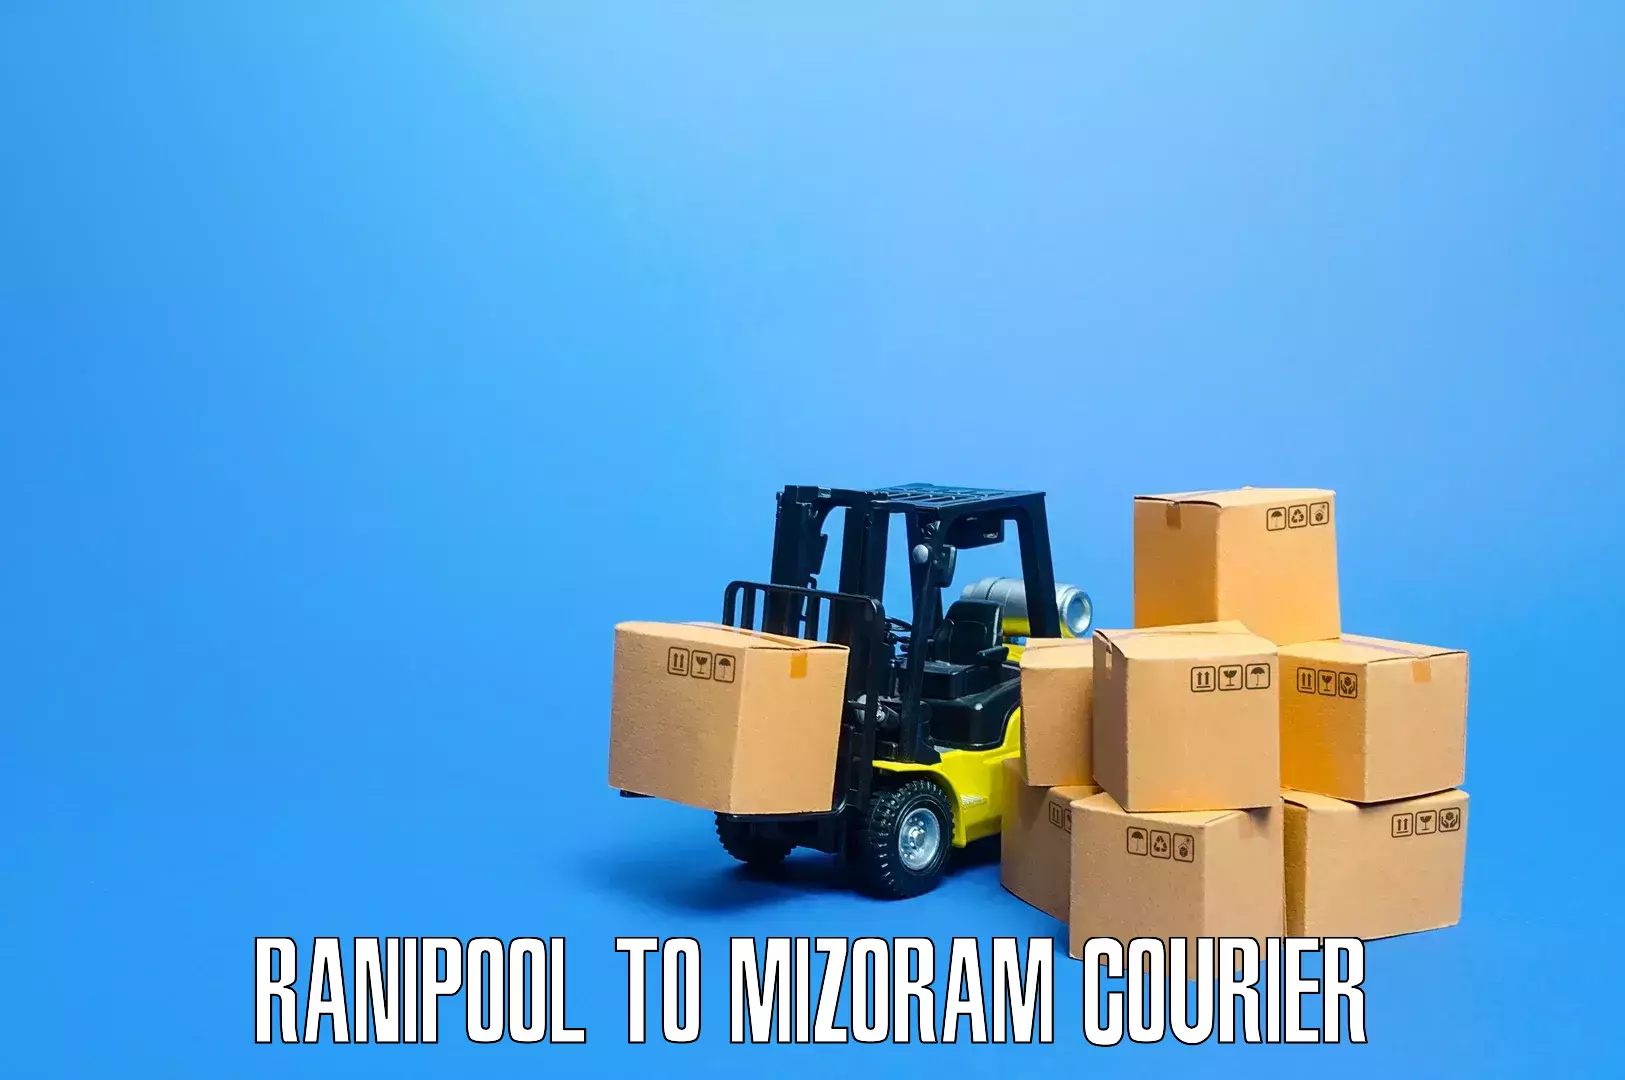 Professional moving company in Ranipool to Hnahthial